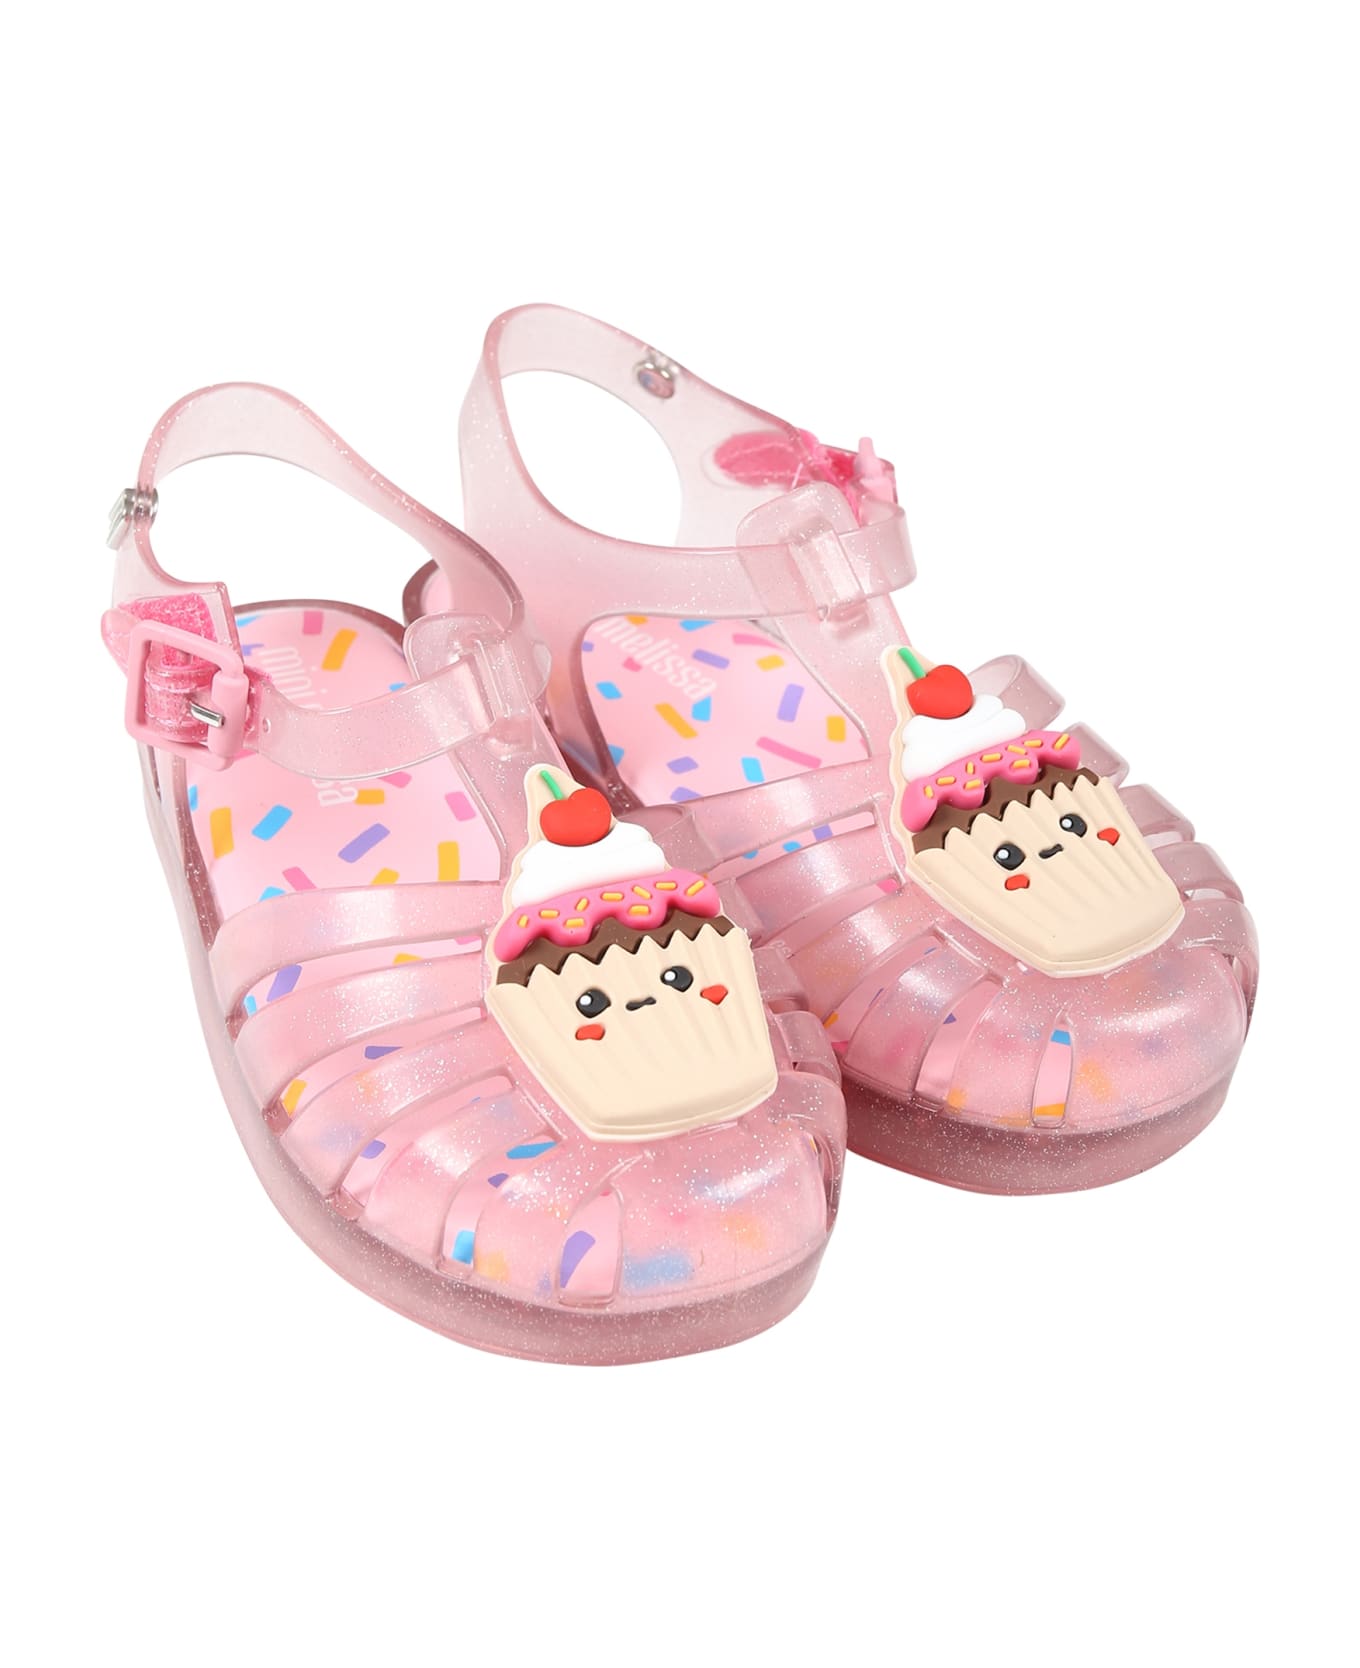 Melissa Pink Sandals For Girl With Cupcake - Pink シューズ